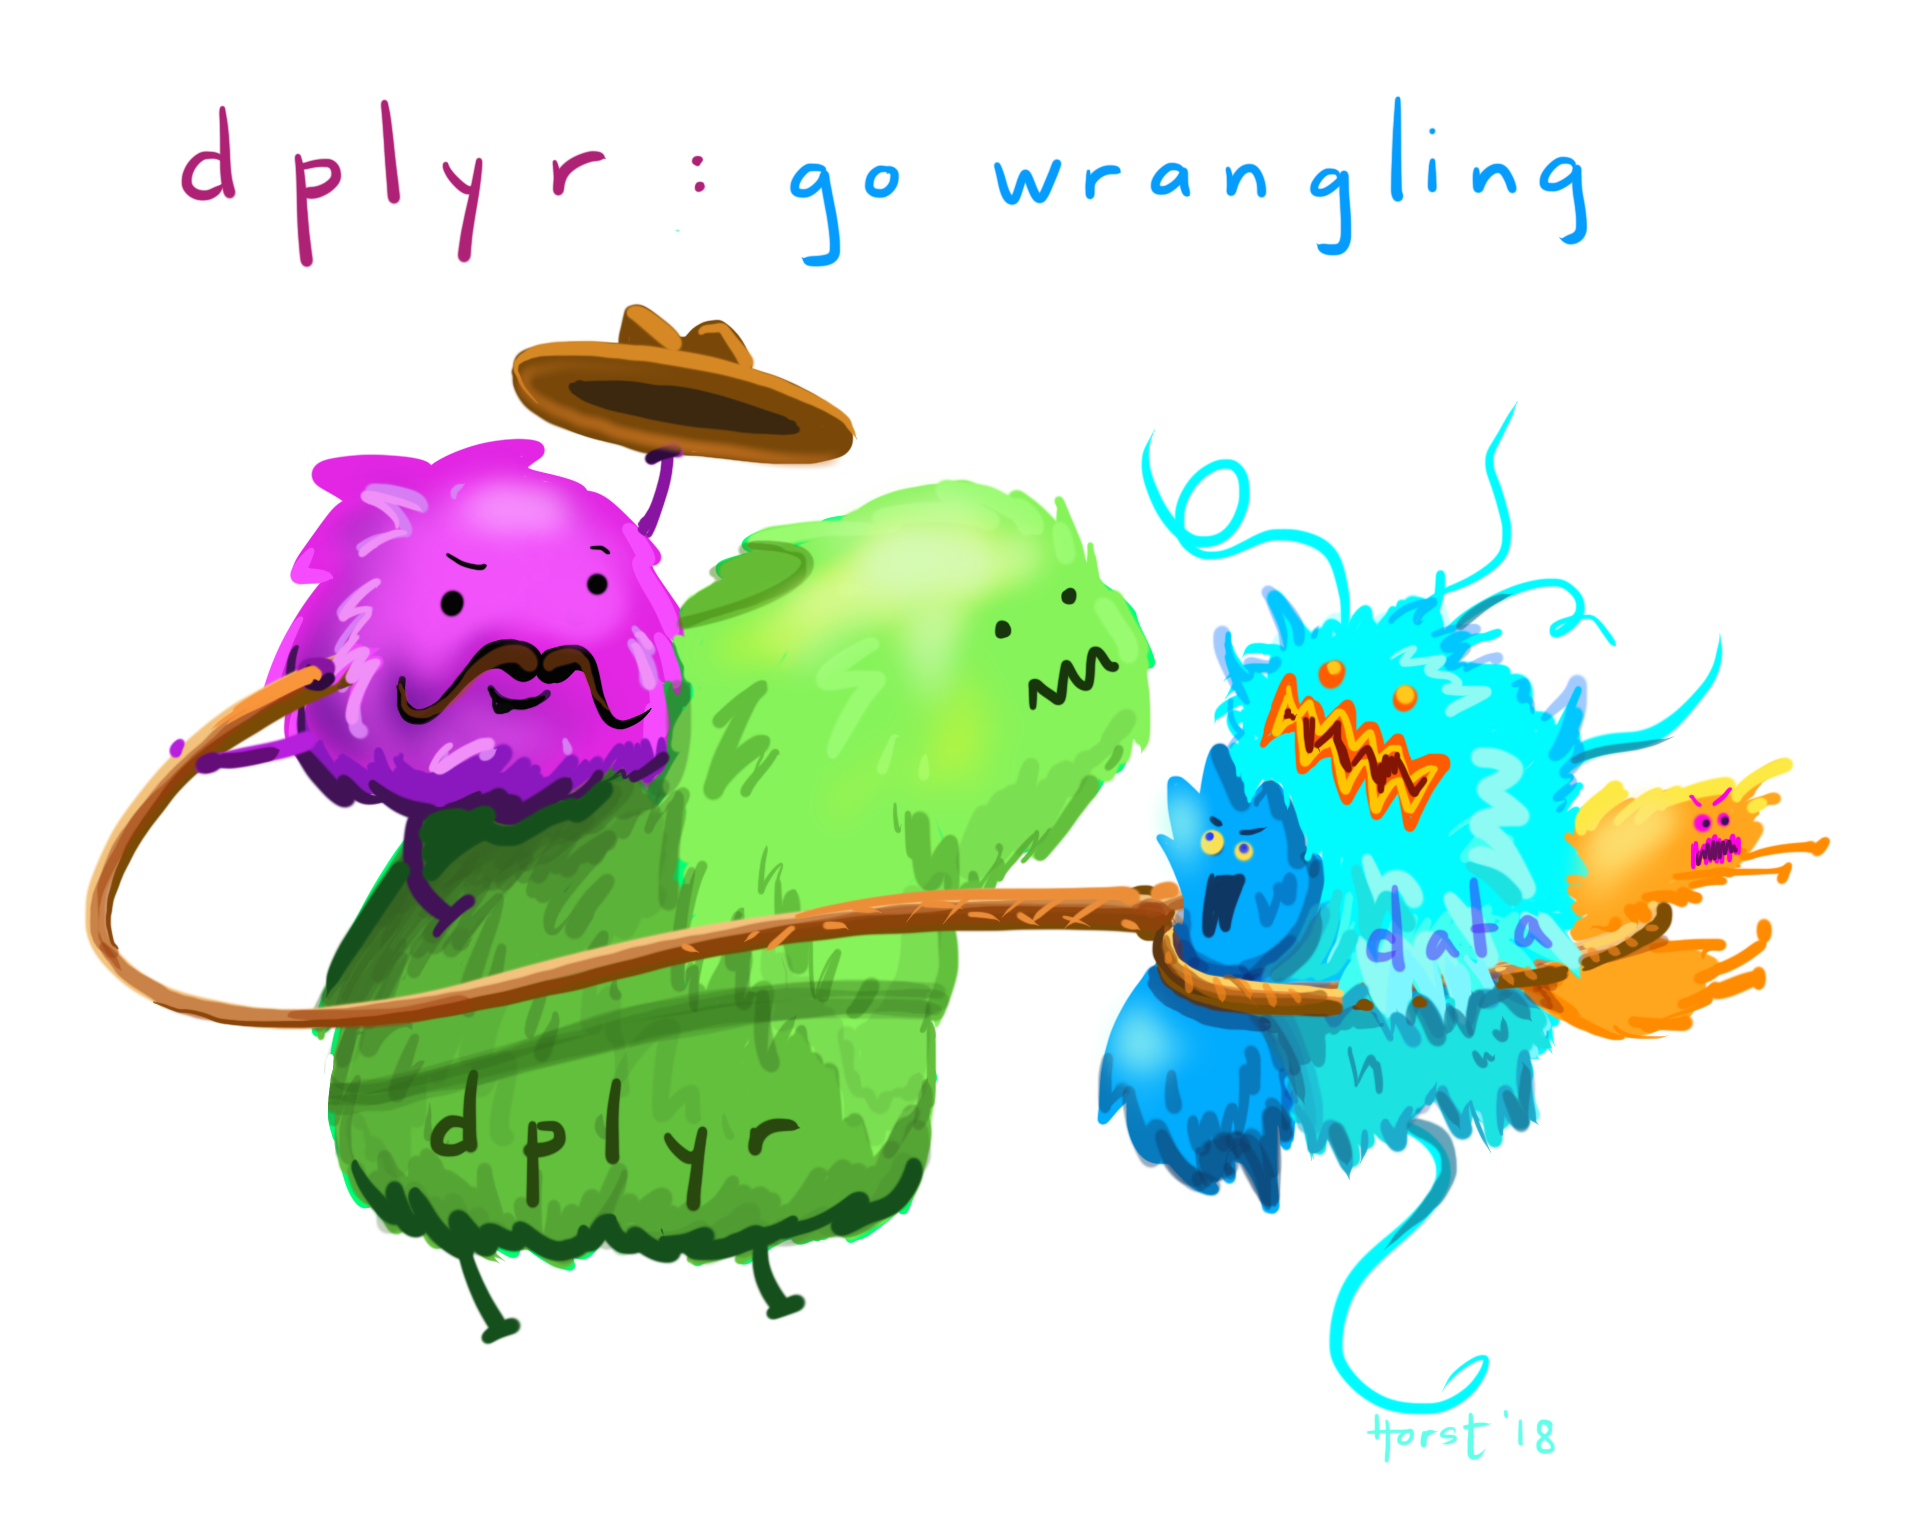 dplyr introduction graphic. Source: [Allison Horst data science and stats illustrations](https://github.com/allisonhorst/stats-illustrations)